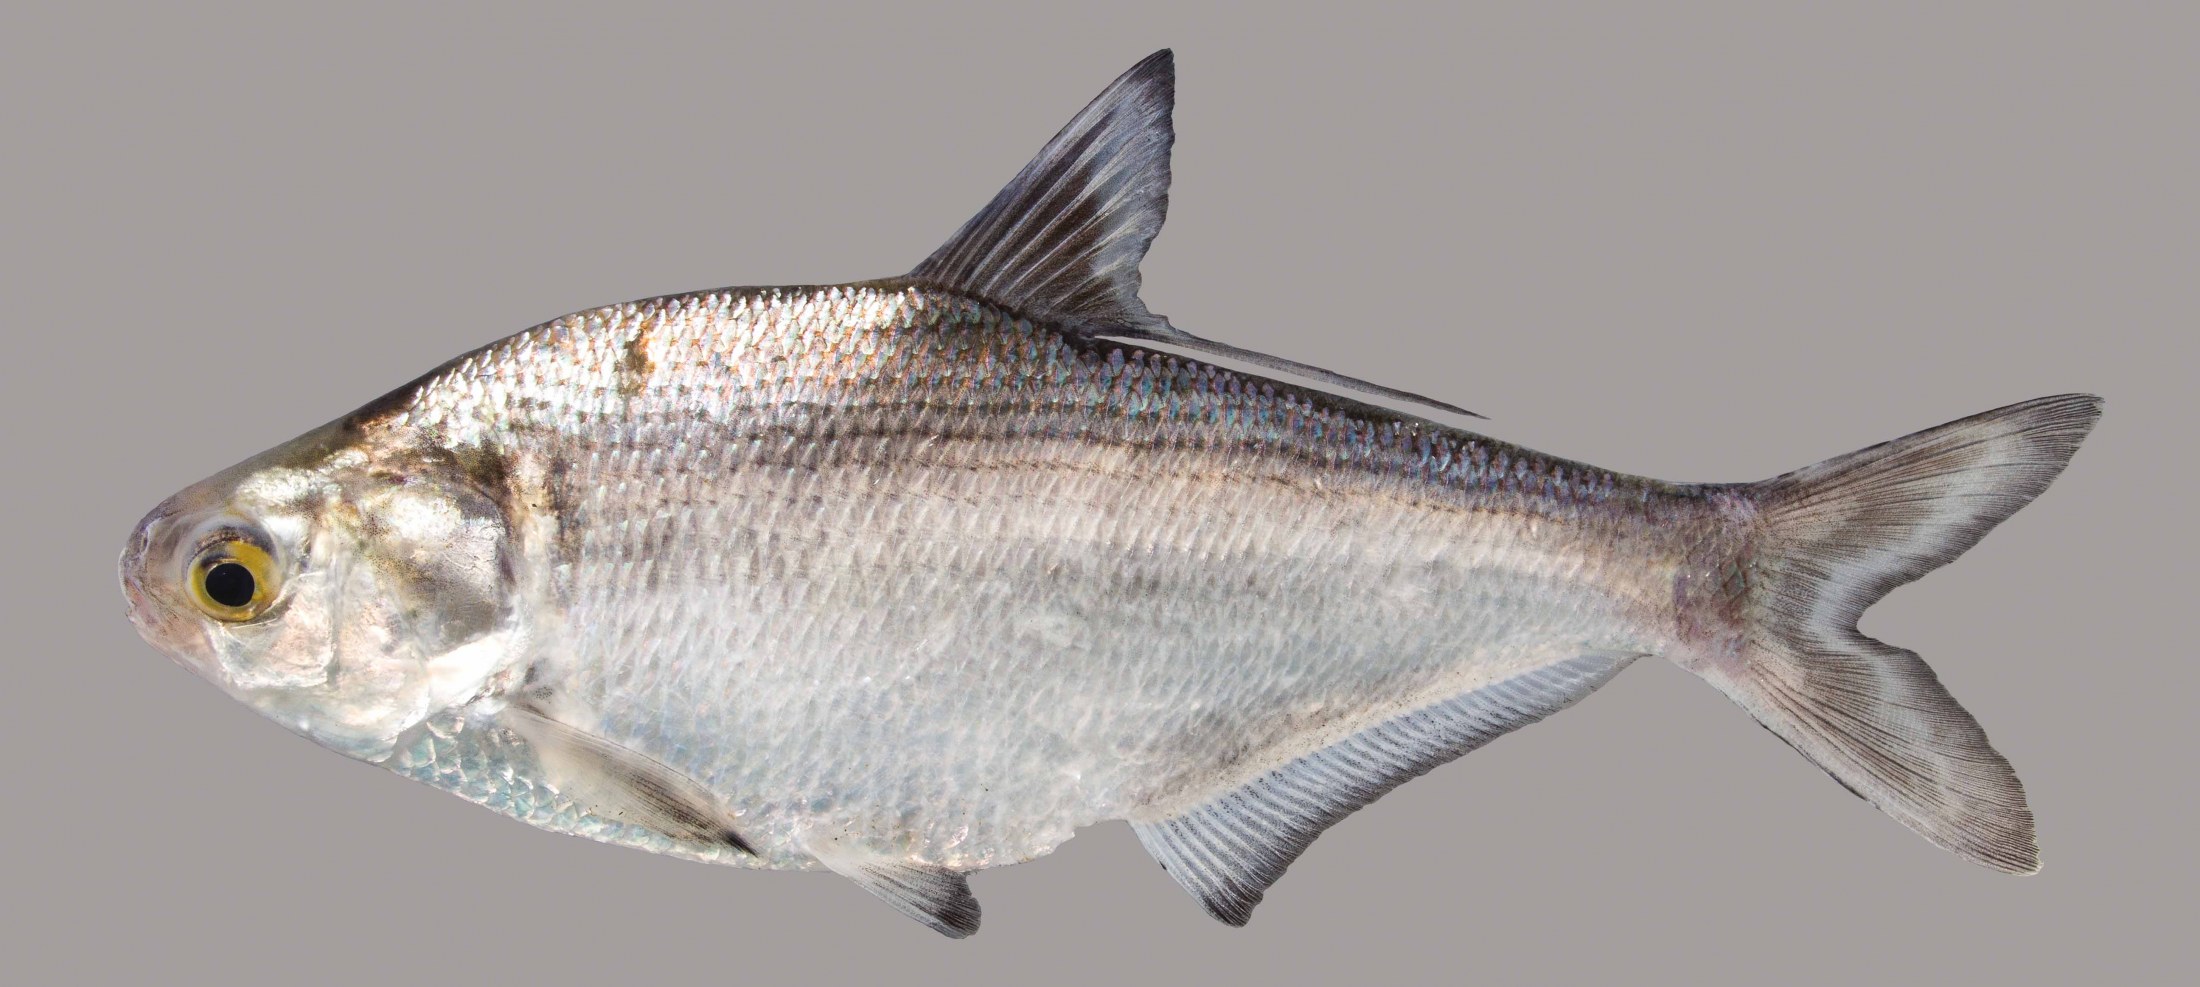 Lateral view of a gizzard shad